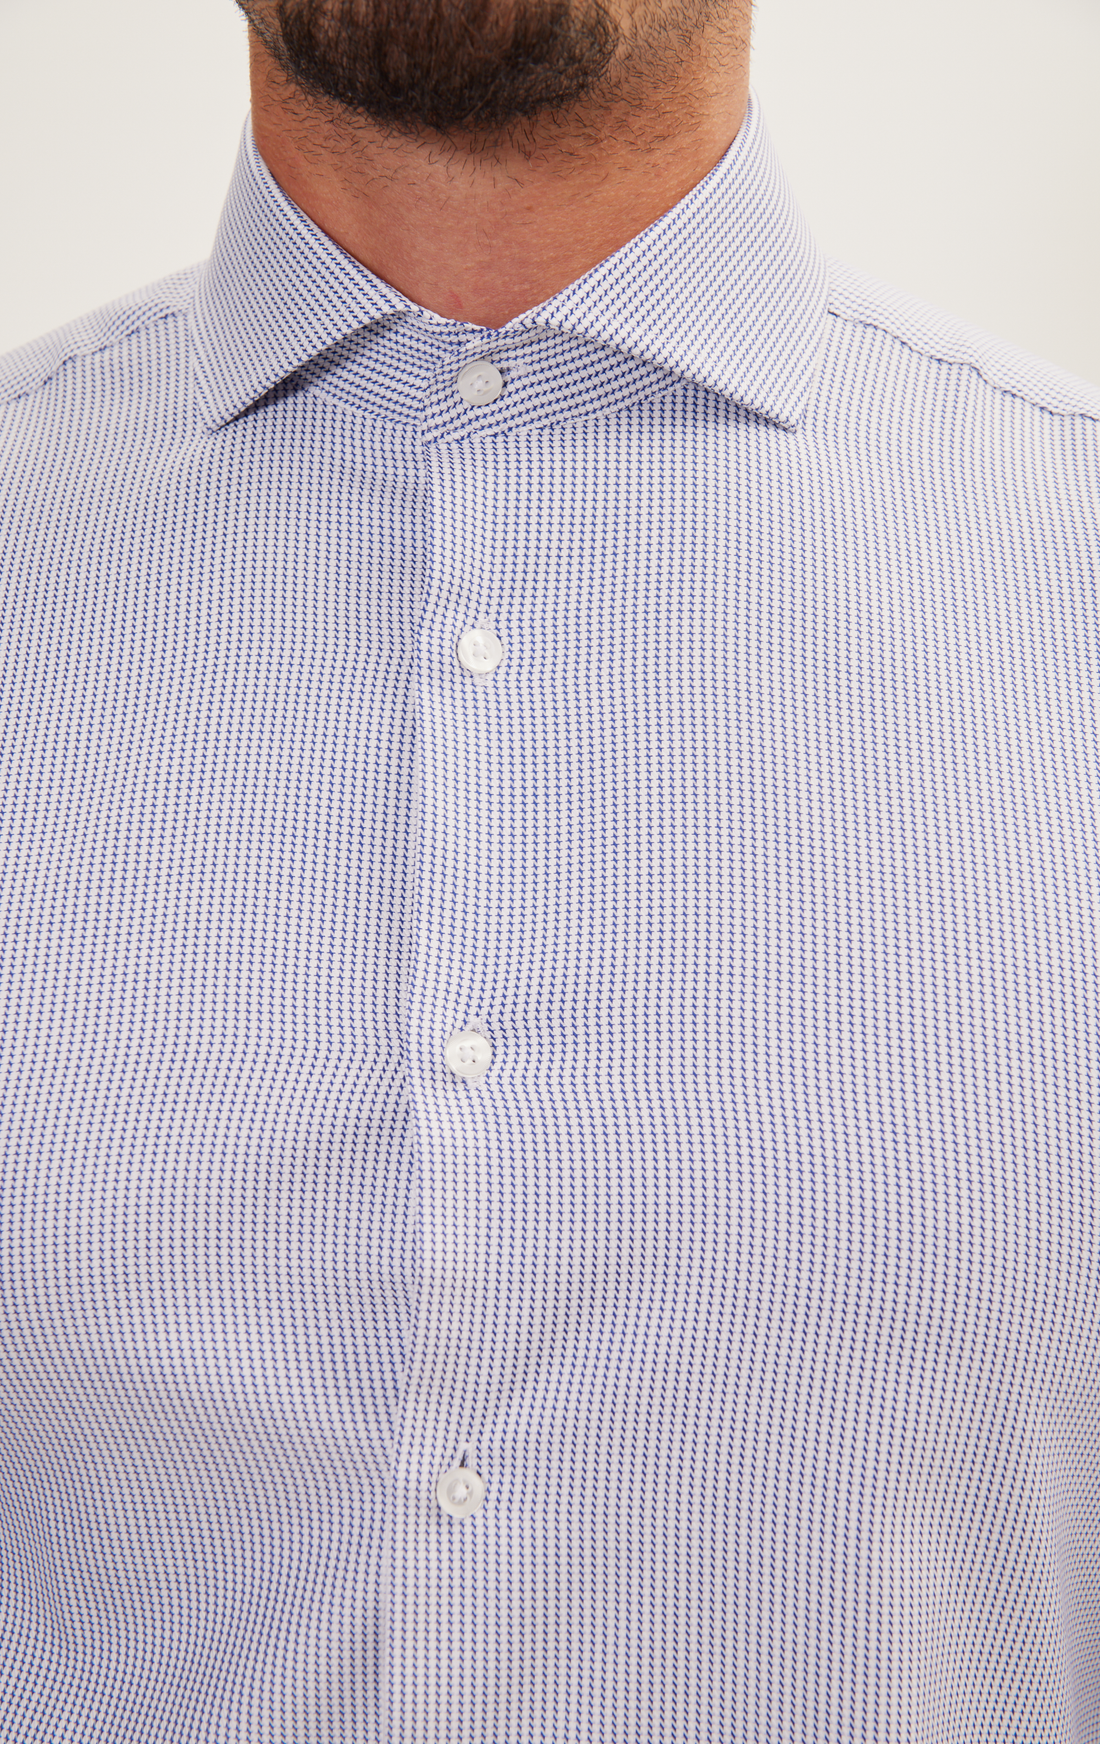 N° AN4903 PURE COTTON FRENCH PLACKET SPREAD COLLAR DRESS SHIRT - BLUE WHITE ROYAL OXFORD